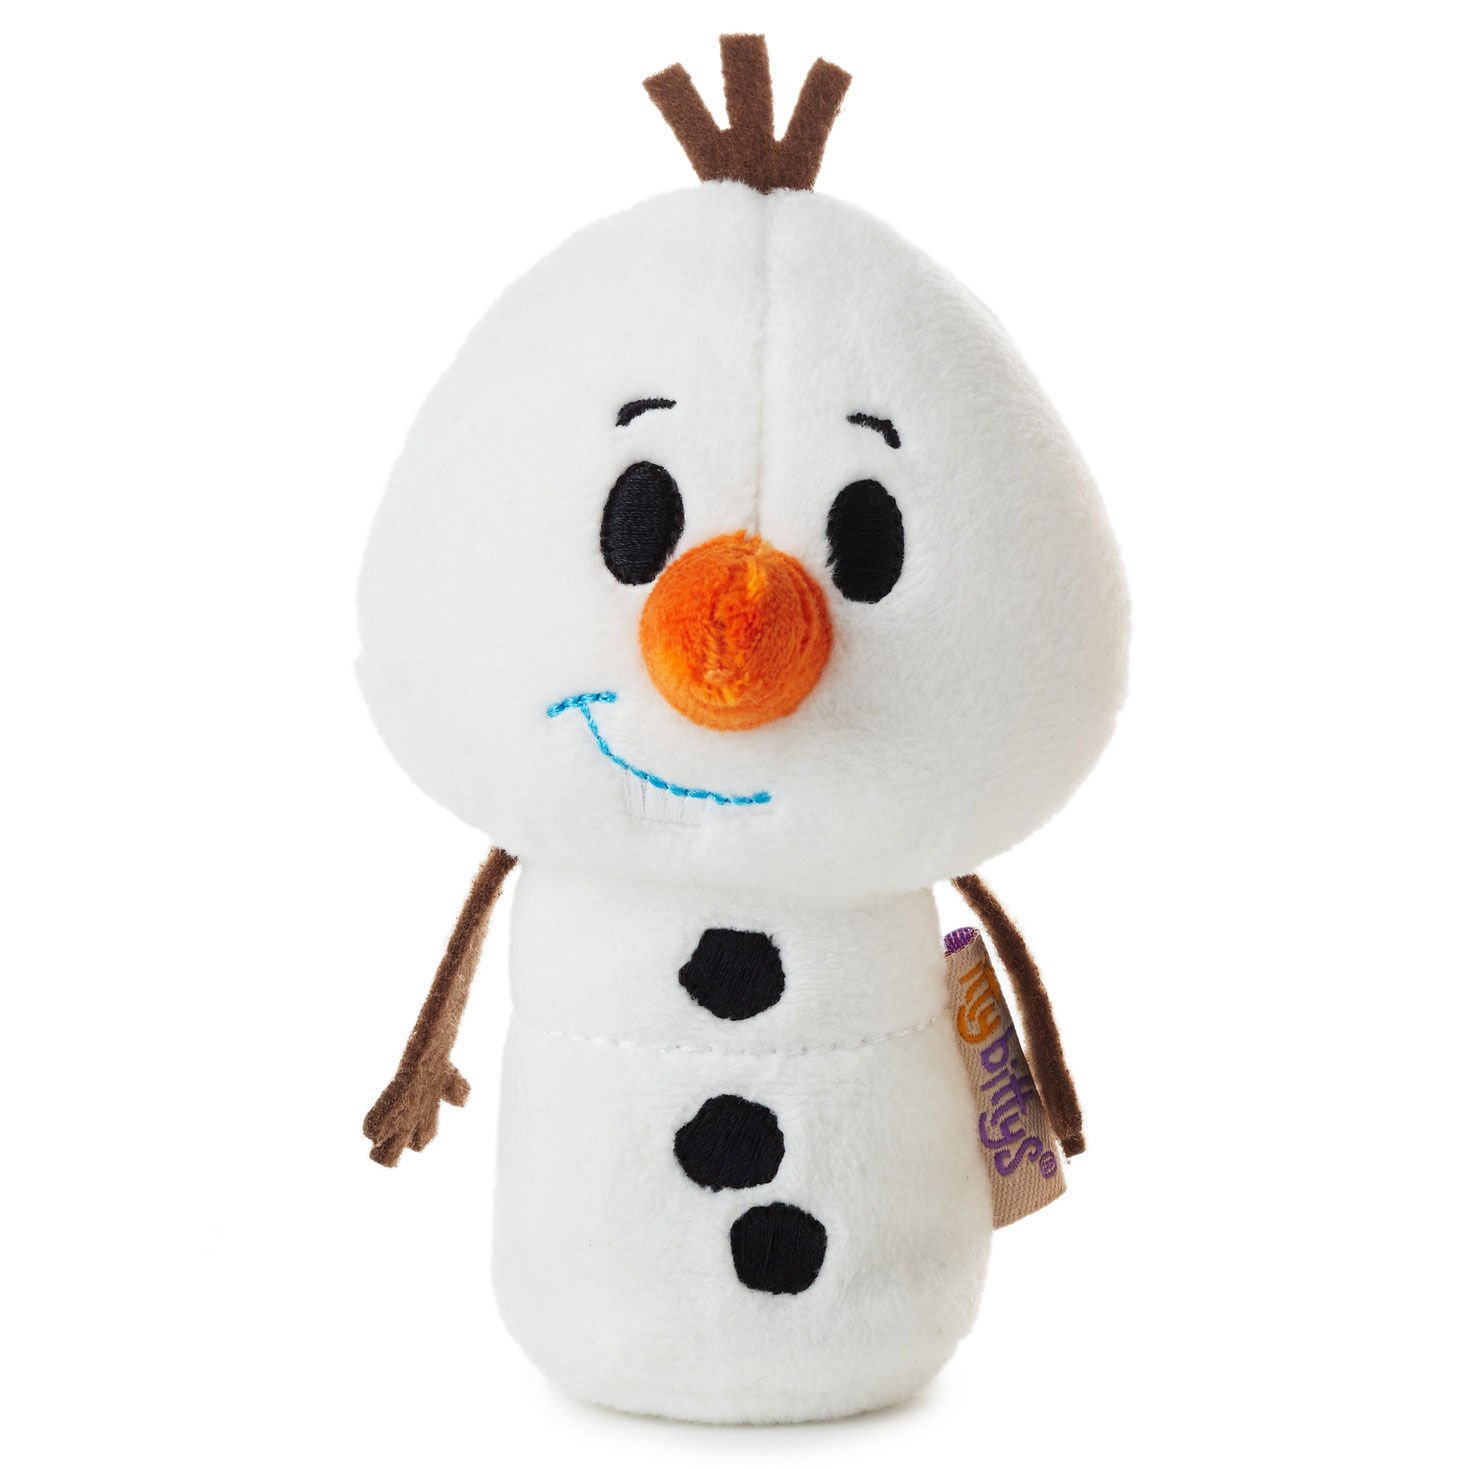 Frozen - Olaf Plush Toy with Sound